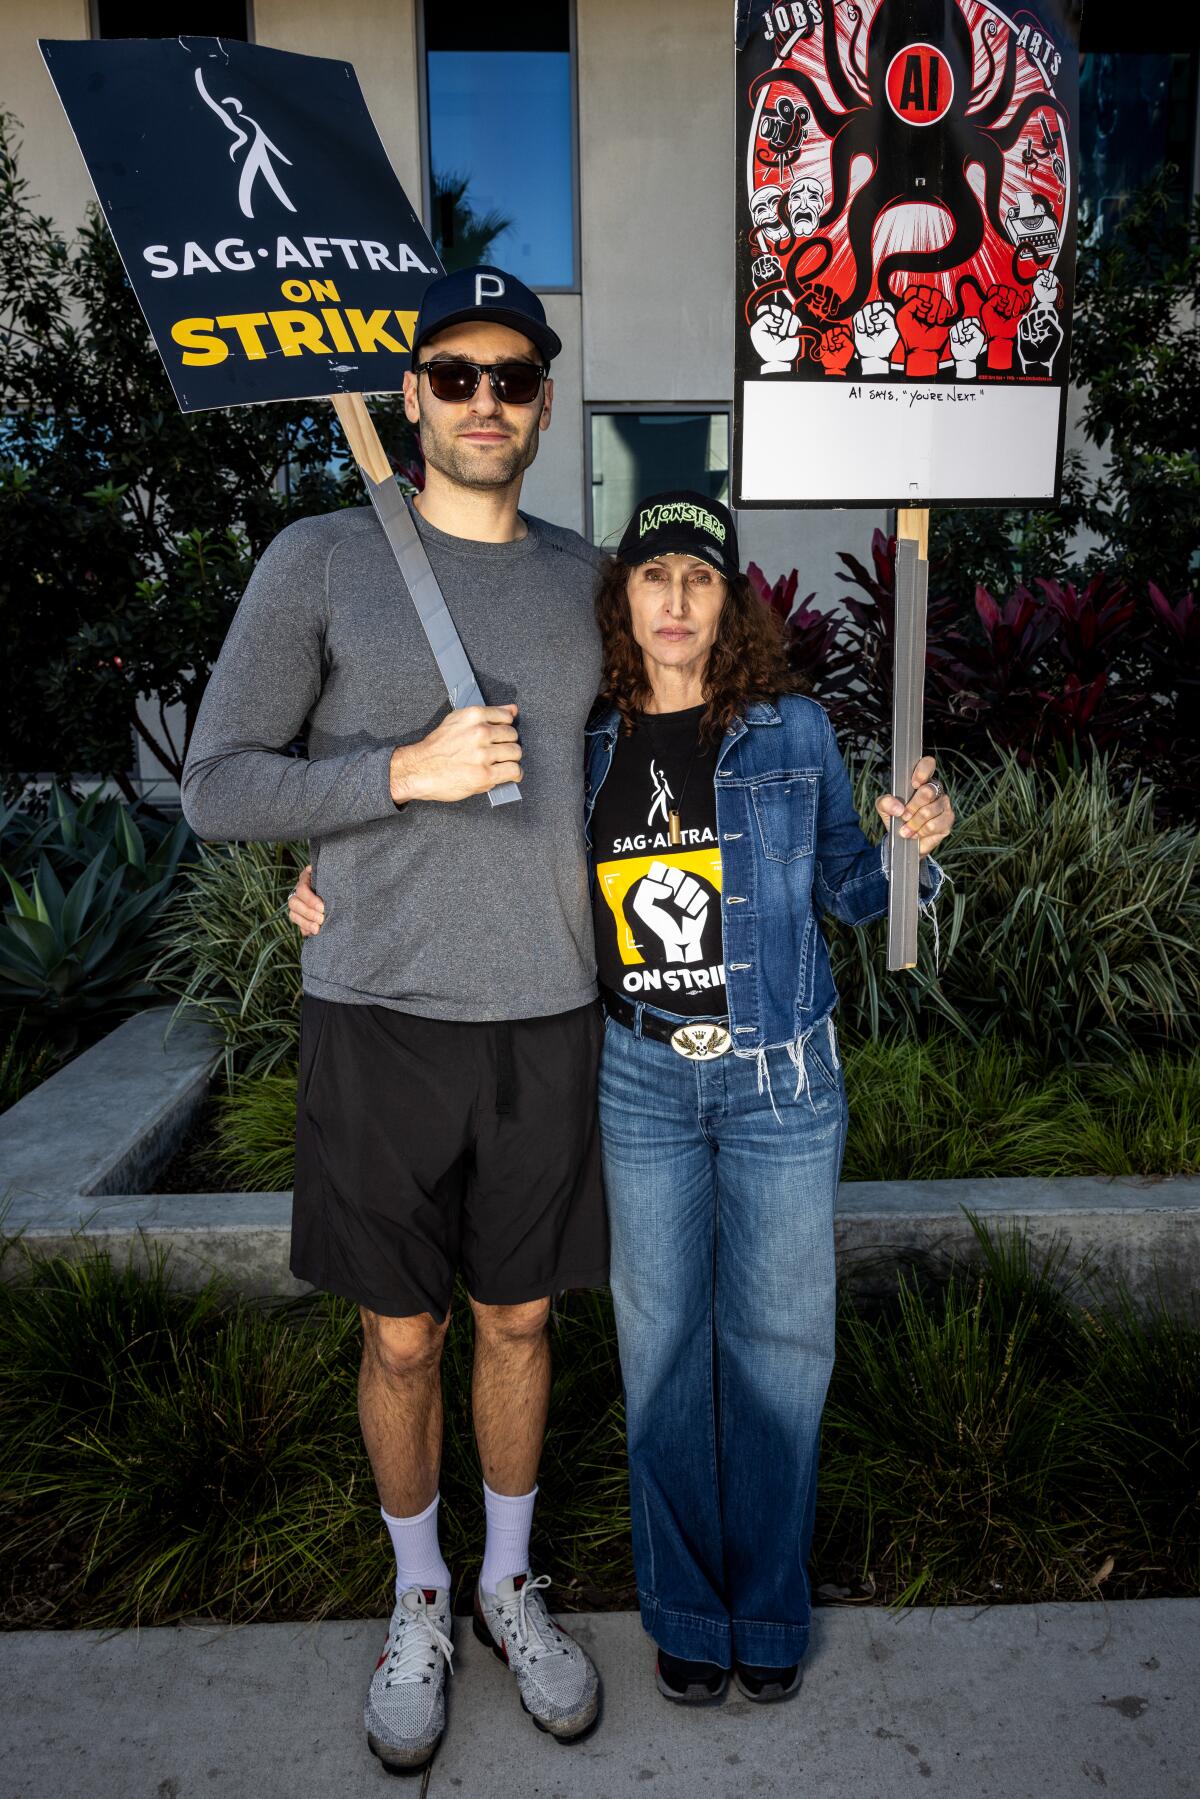 A man in a gray shirt and black shorts and a woman in a denim outfit pose together while holding picket signs.